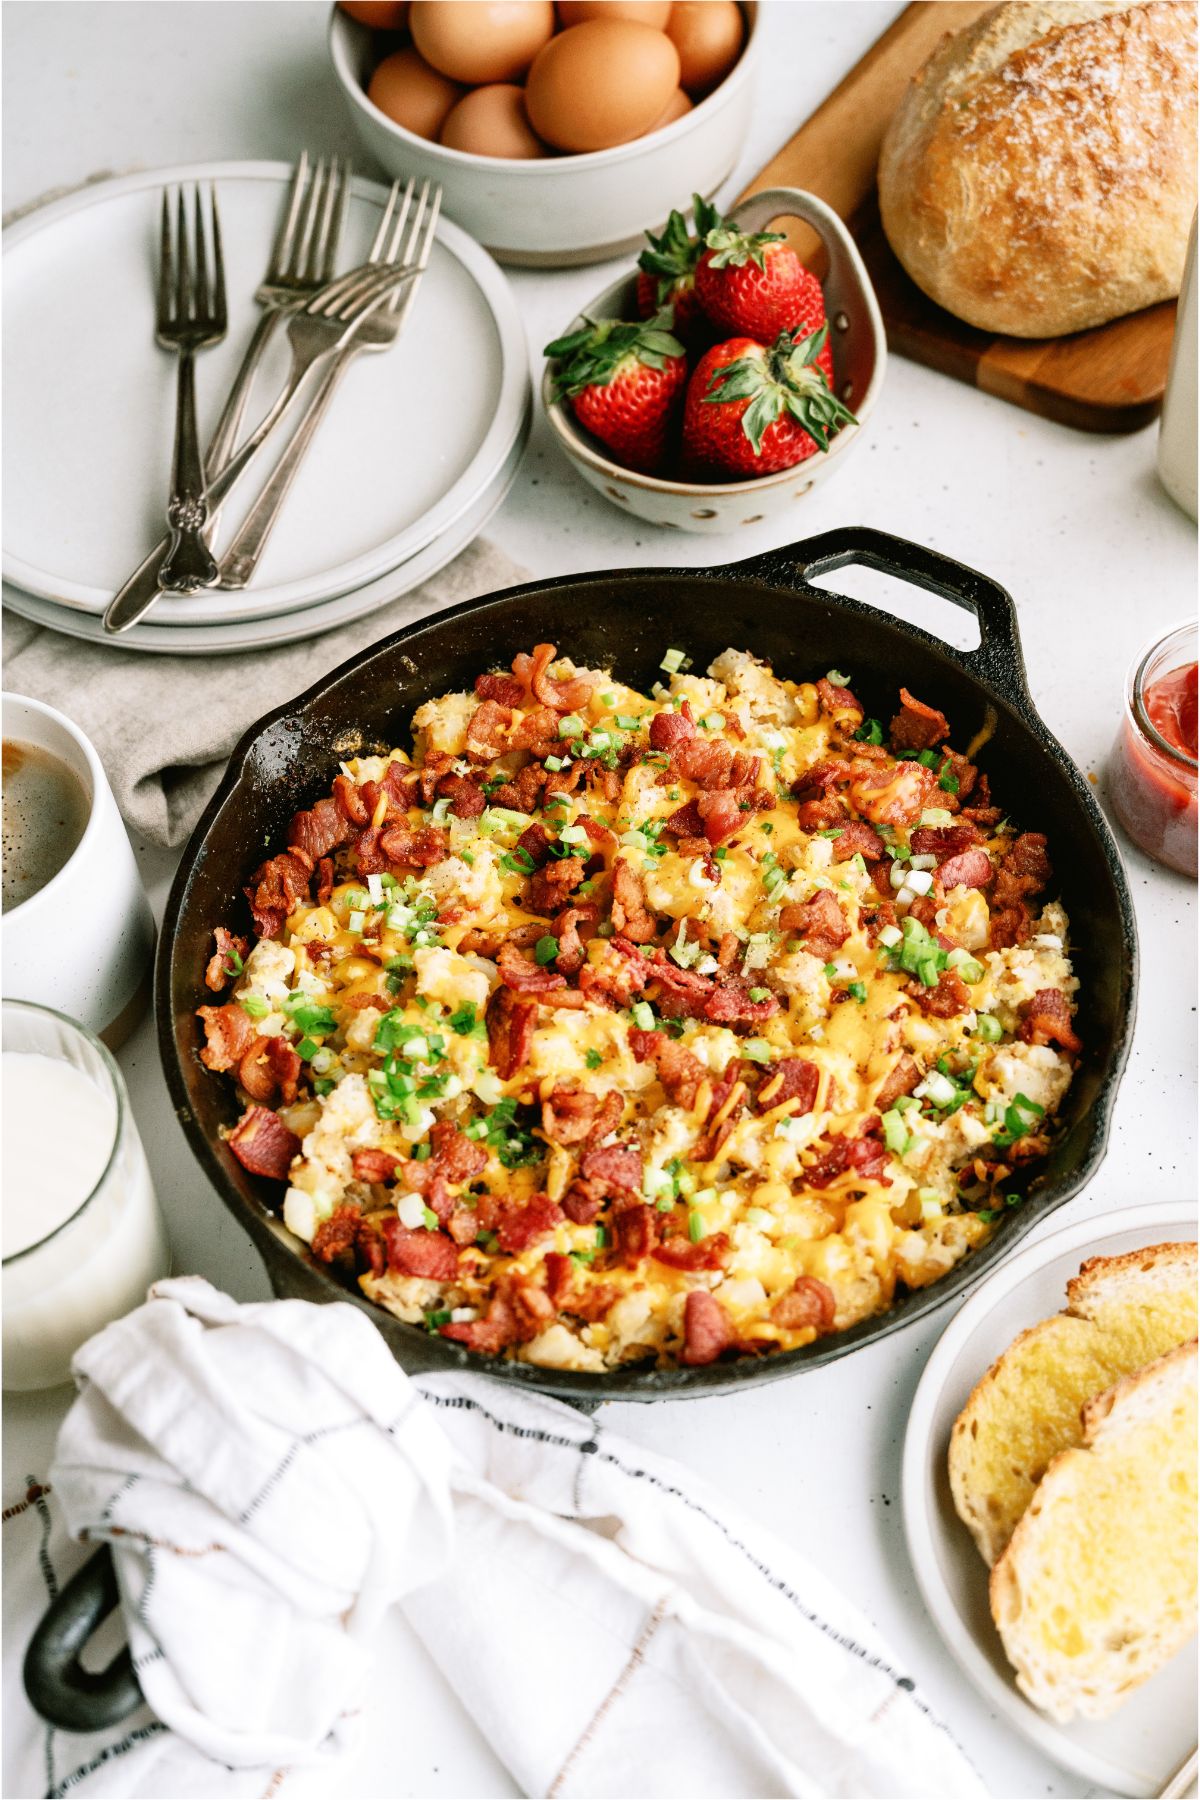 Sunrise Skillet in a skillet pan with other breakfast items on a table